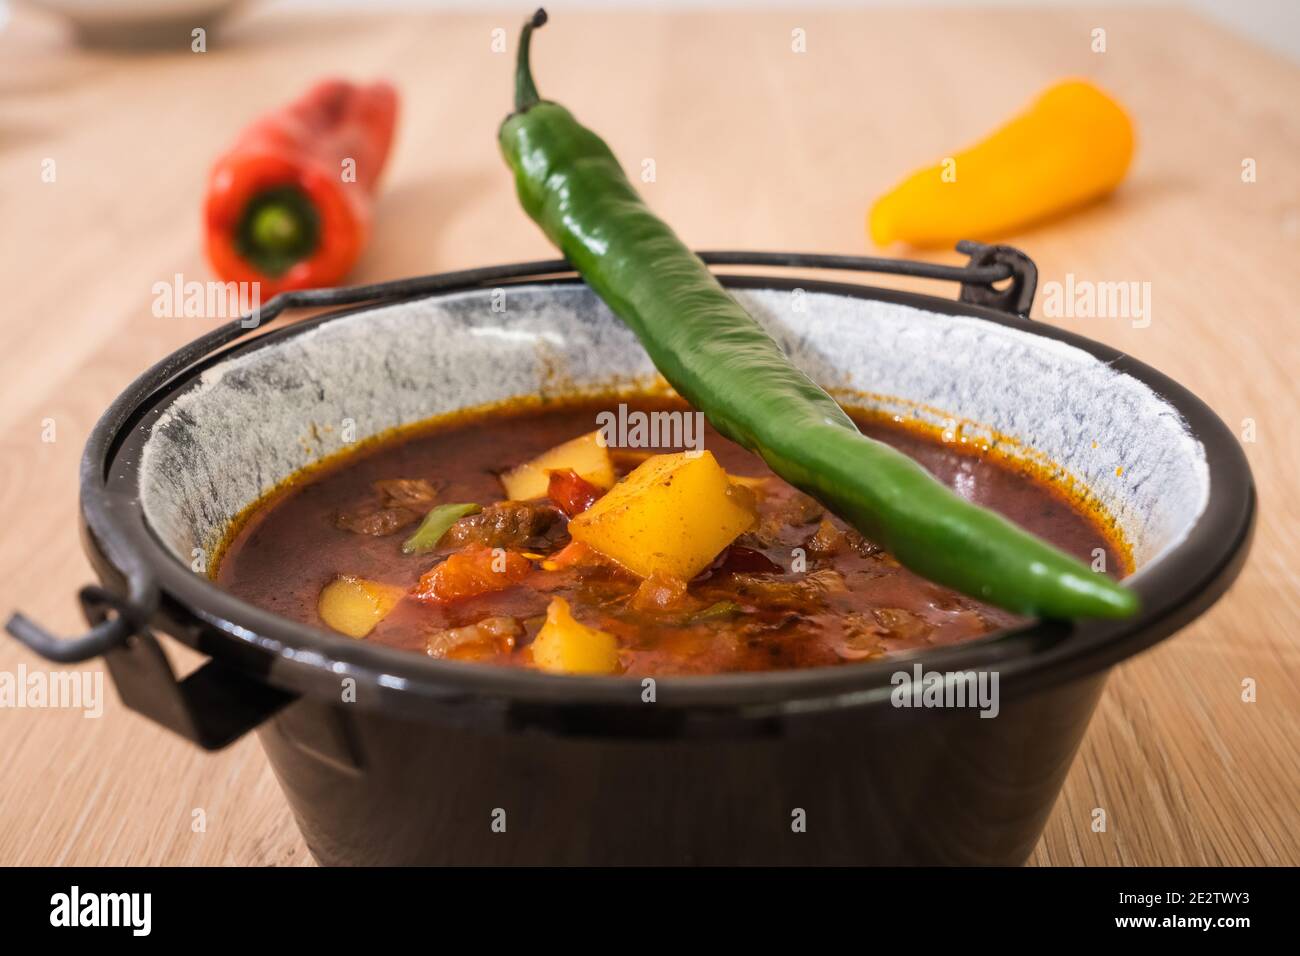 Hungarian Beef Goulash or Gulyas Soup or Stew Served in a Small Cauldron with Potatoes, Meat, Paprika and Chili and Bell Pepper Stock Photo